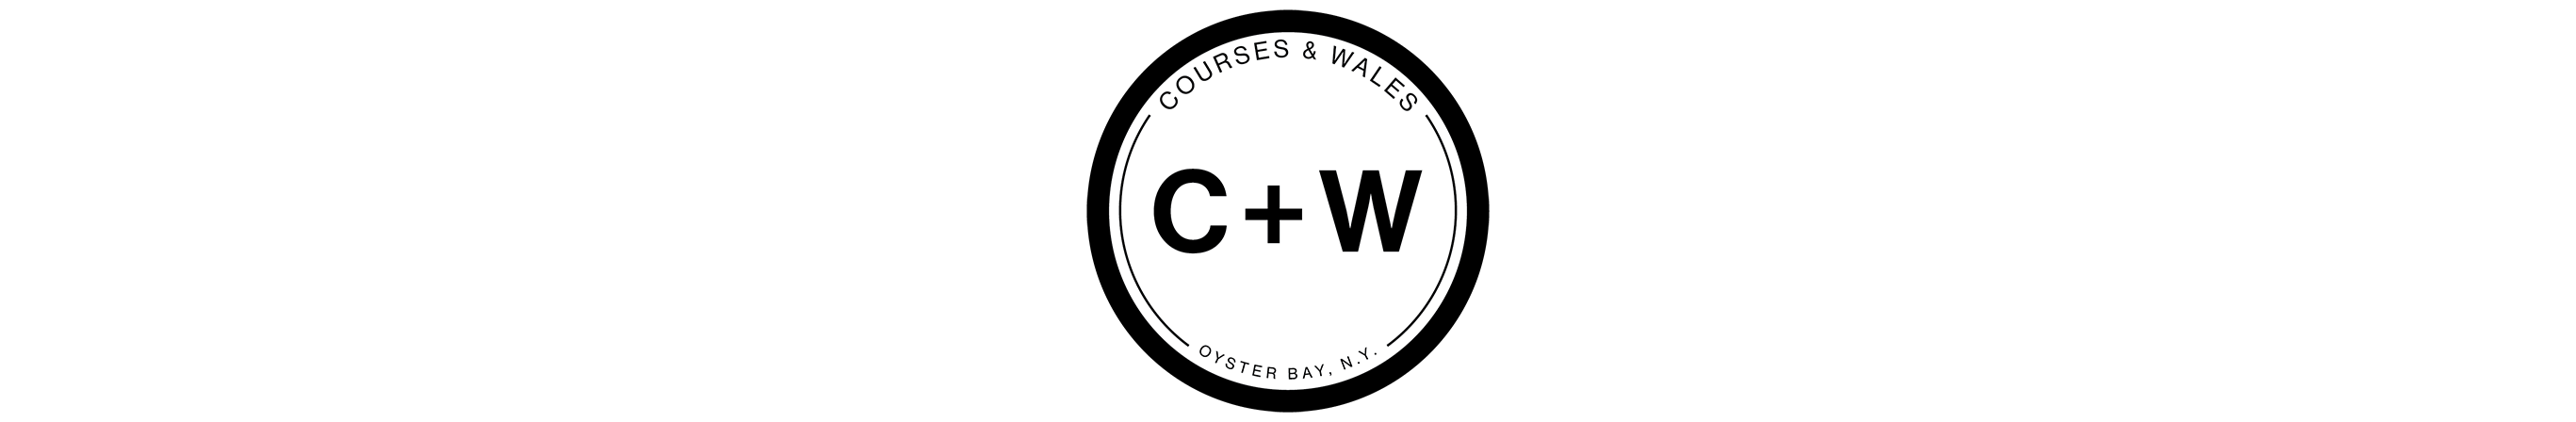 Courses & Wales